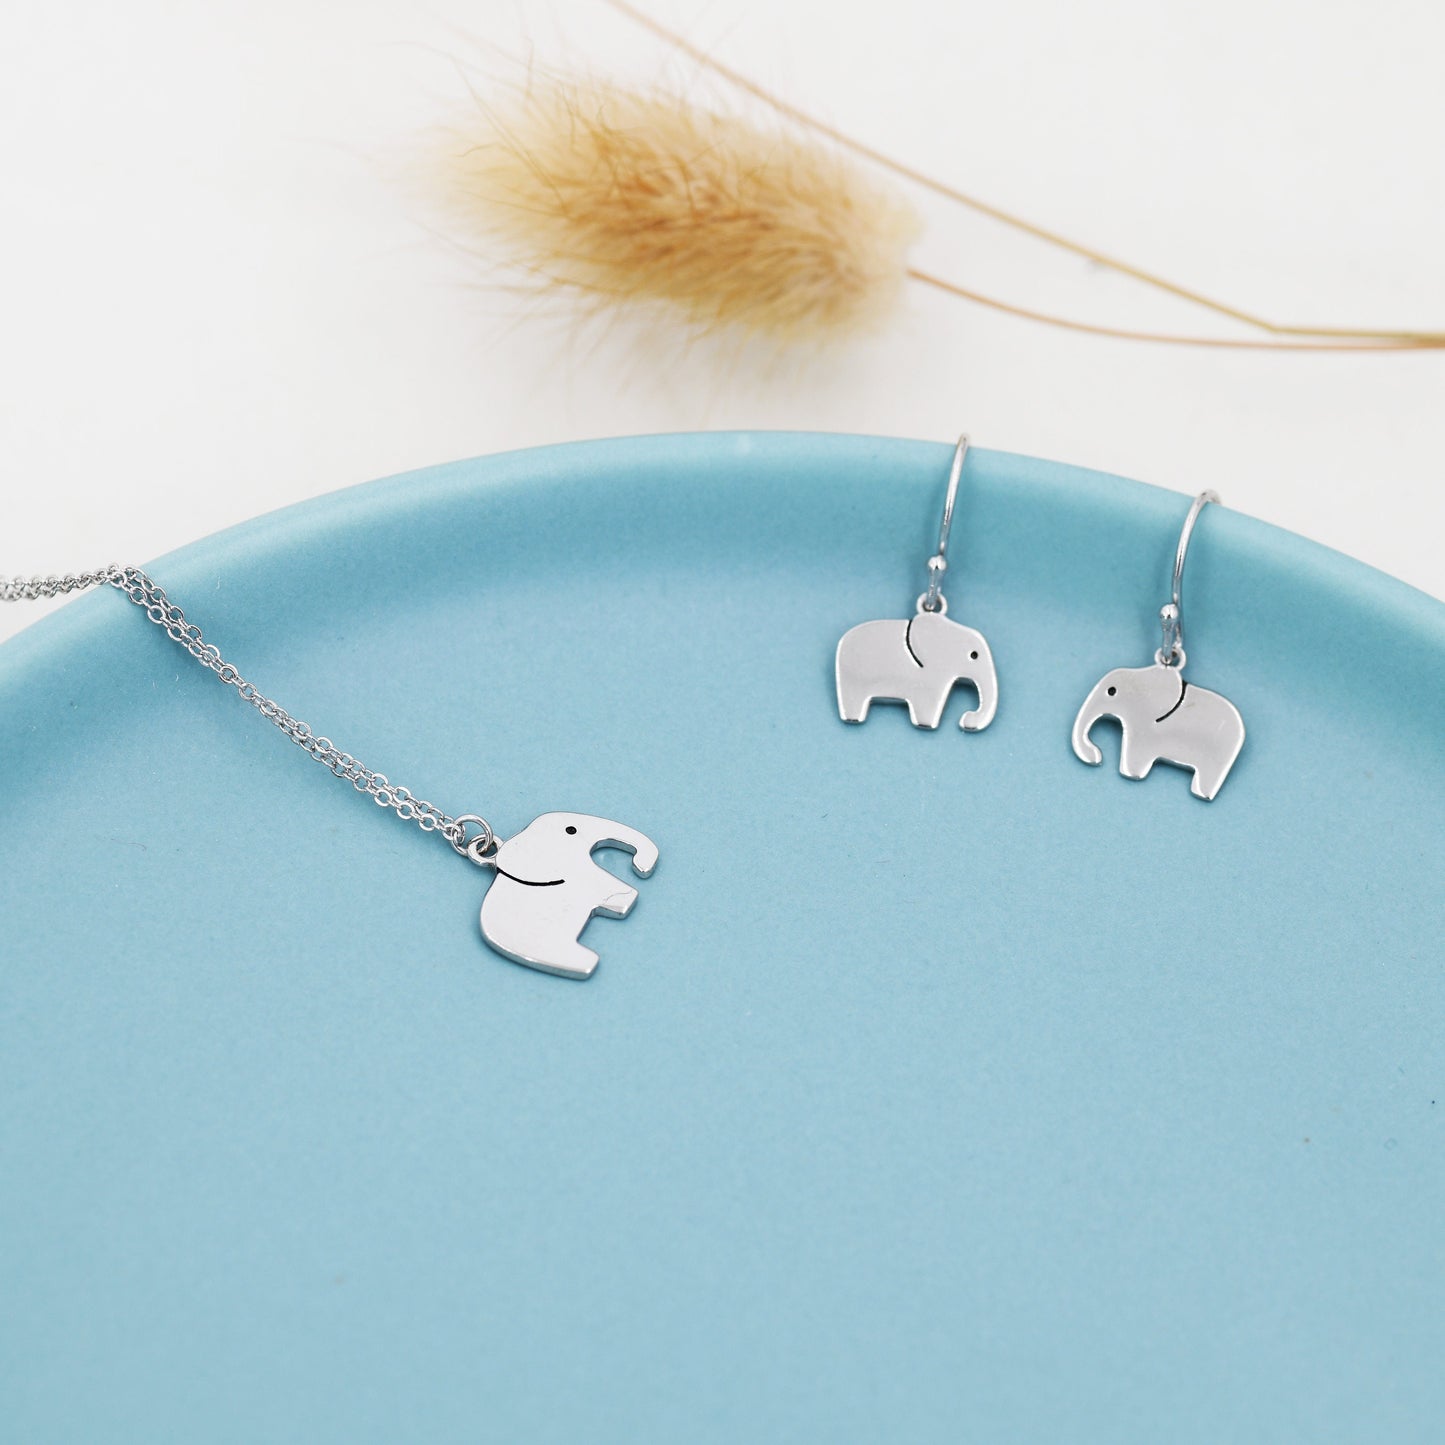 Elephant Necklace and Dangle Earrings in Sterling Silver, Silver Animal Earrings and Pendant, Nature Inspired Jewellery